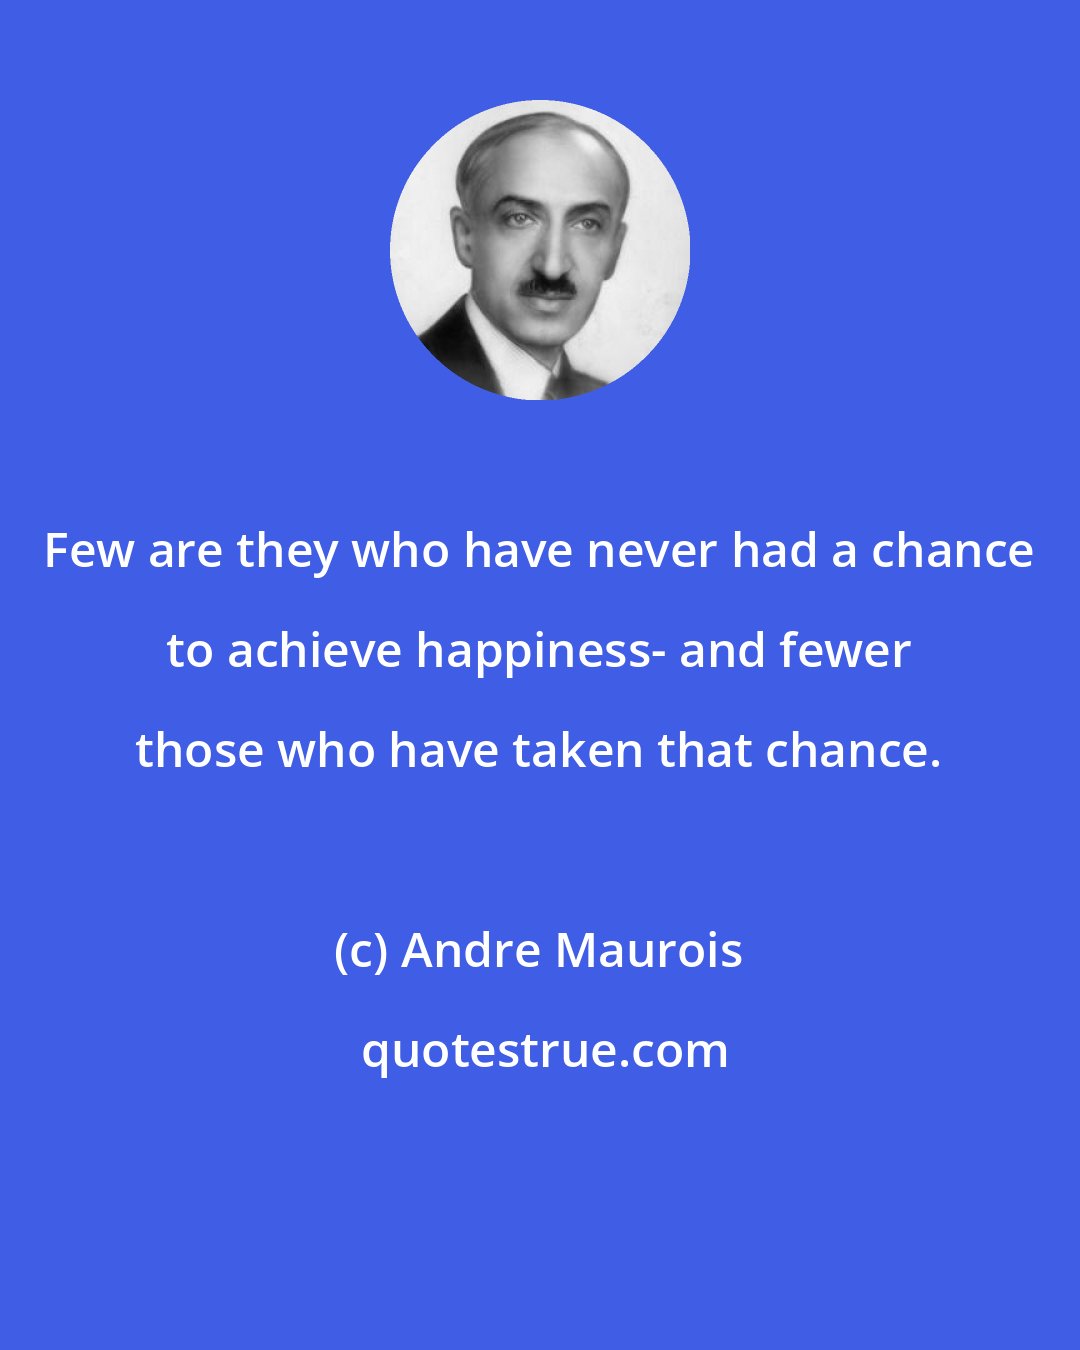 Andre Maurois: Few are they who have never had a chance to achieve happiness- and fewer those who have taken that chance.